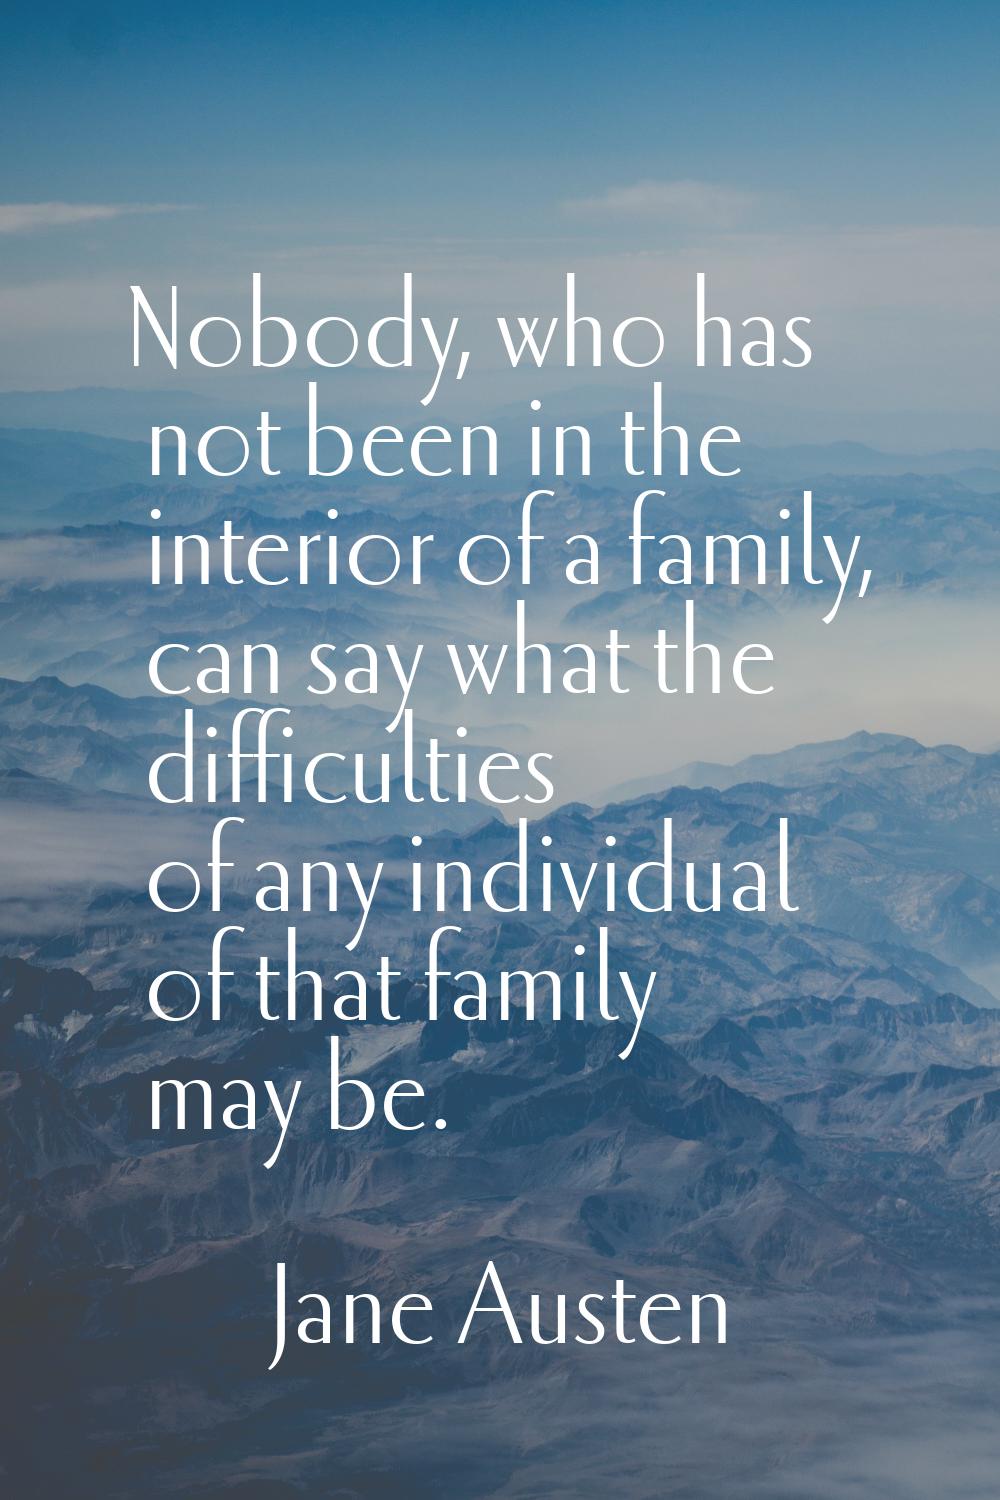 Nobody, who has not been in the interior of a family, can say what the difficulties of any individu